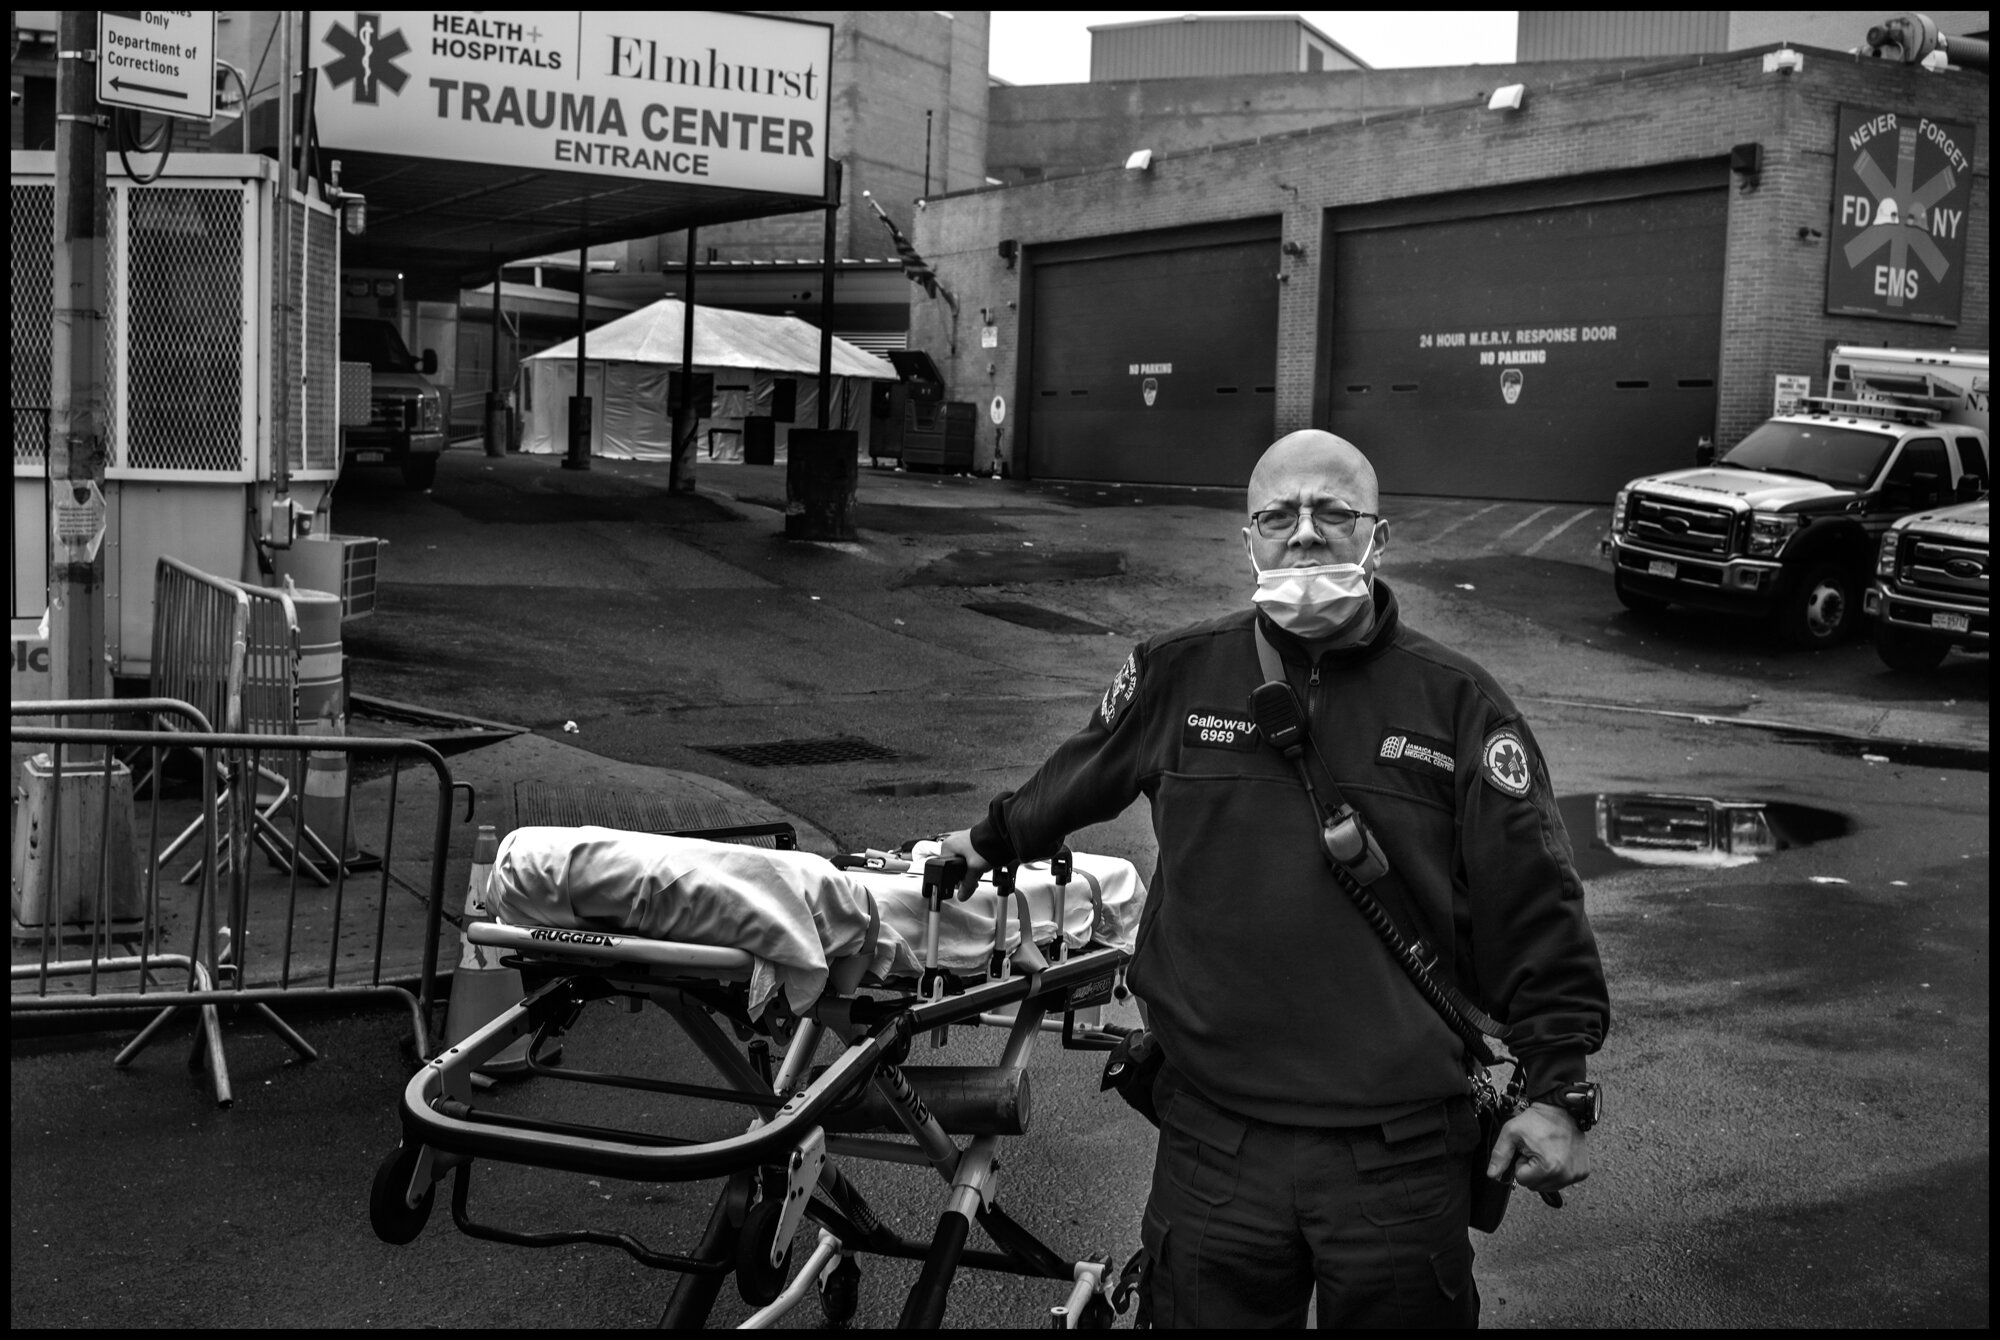  At the back of the hospital where dozens of ambulances were lined up, I spoke to an ambulance medic, Mike Galloway. He told me, “With 9/11, once it happened, you could see it coming. This is an invisible enemy. We don’t see what is coming. I could b